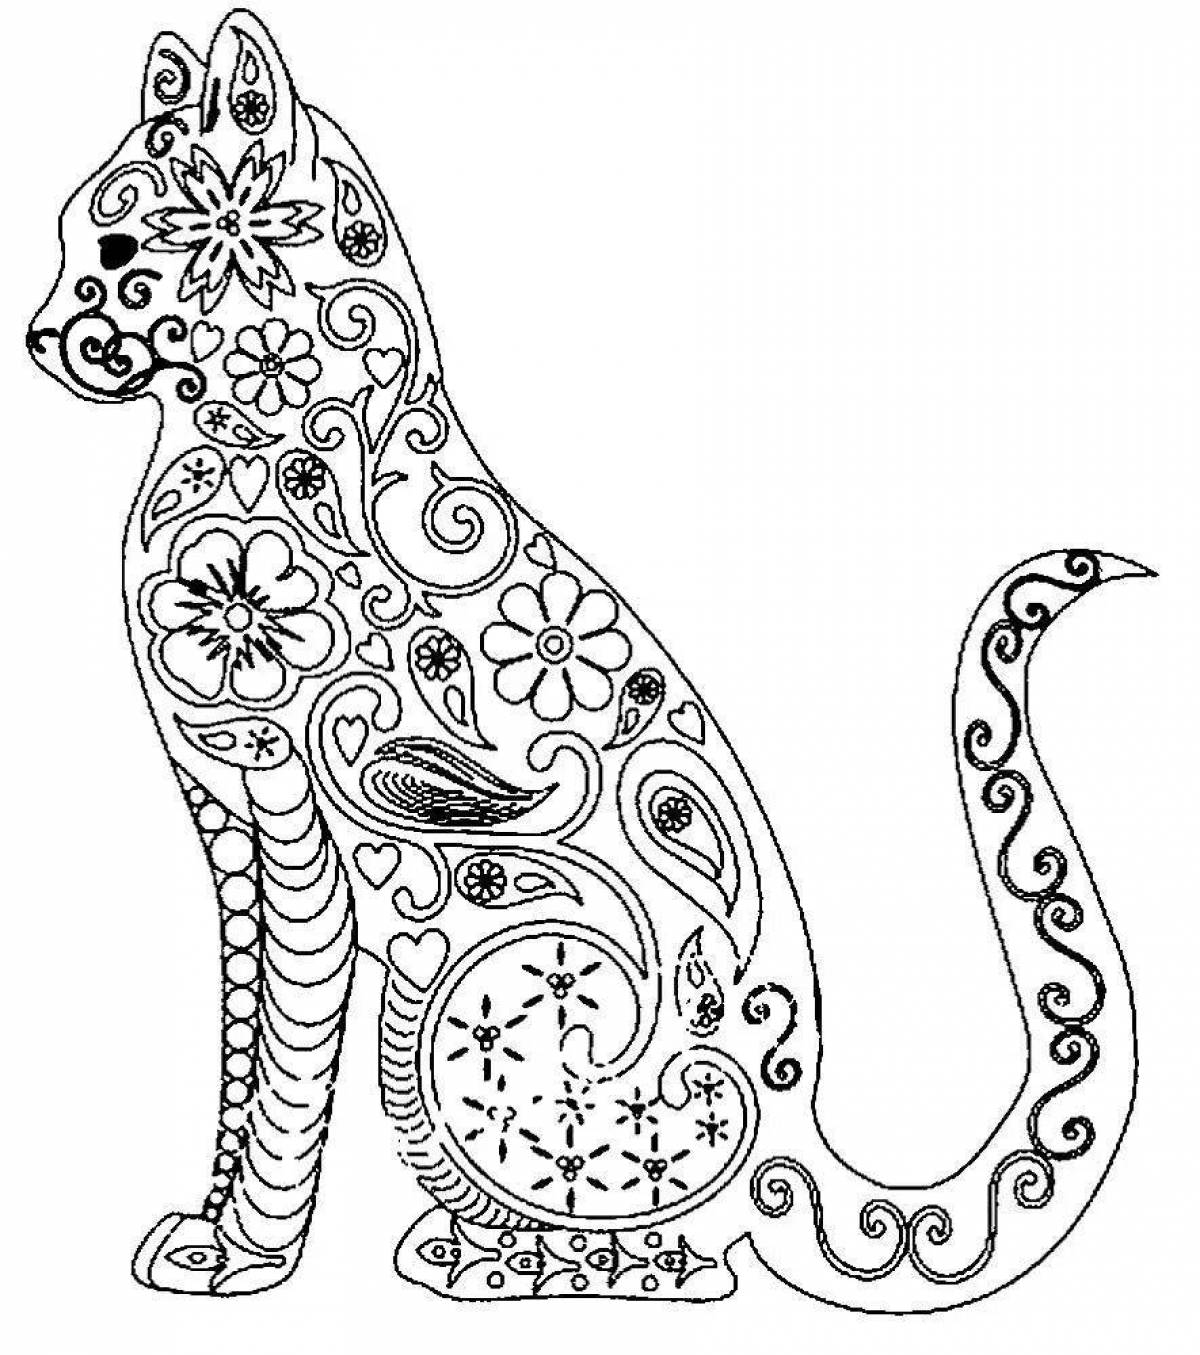 Amazing patterned animal coloring pages